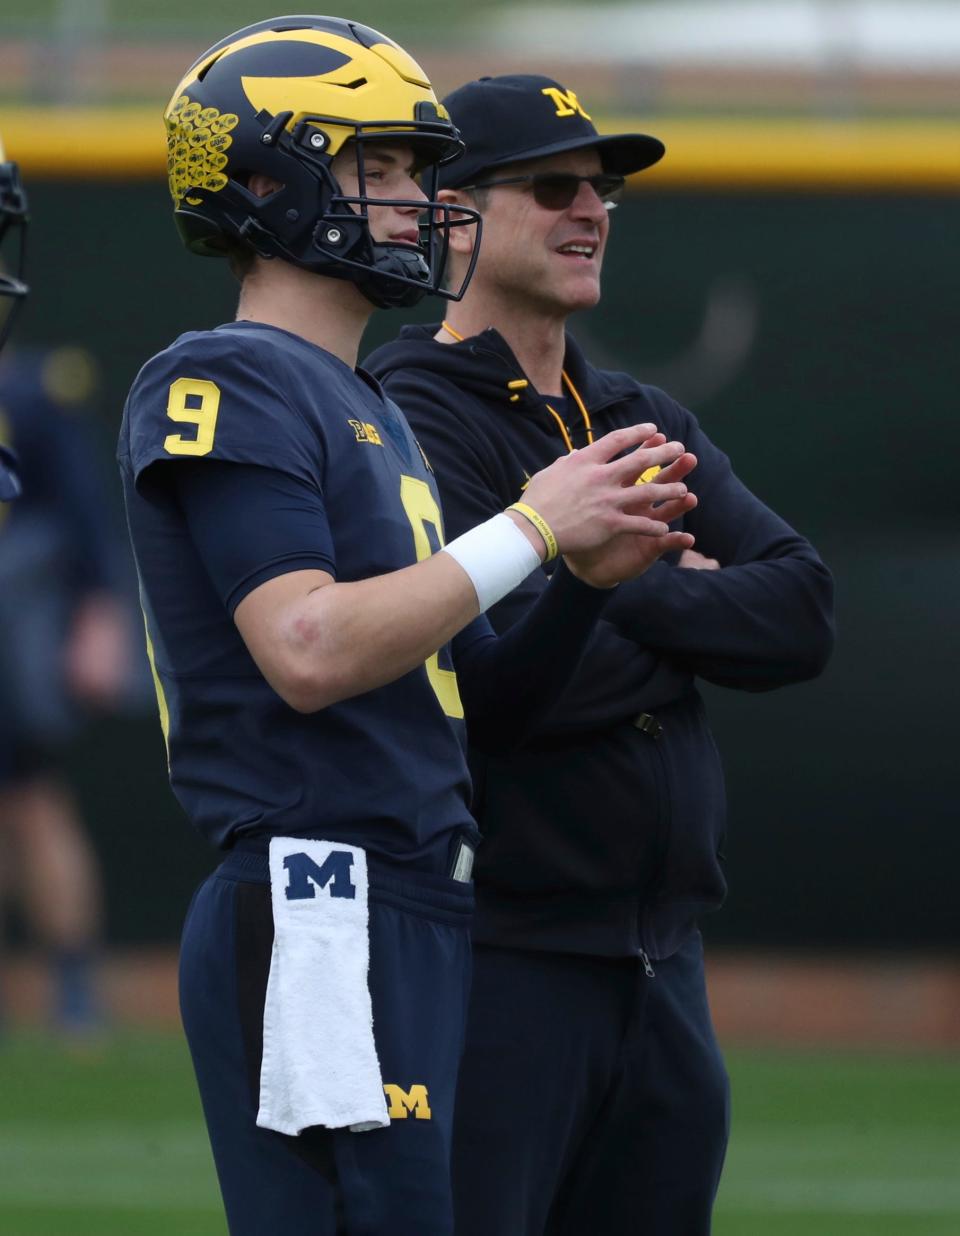 Jim Harbaugh talks with Michigan quarterback J.J. McCarthy during drills at the Los Angeles Angels training facility in preparation before the Fiesta Bowl against TCU on Thursday, Dec. 29, 2022, in Tempe, Arizona.